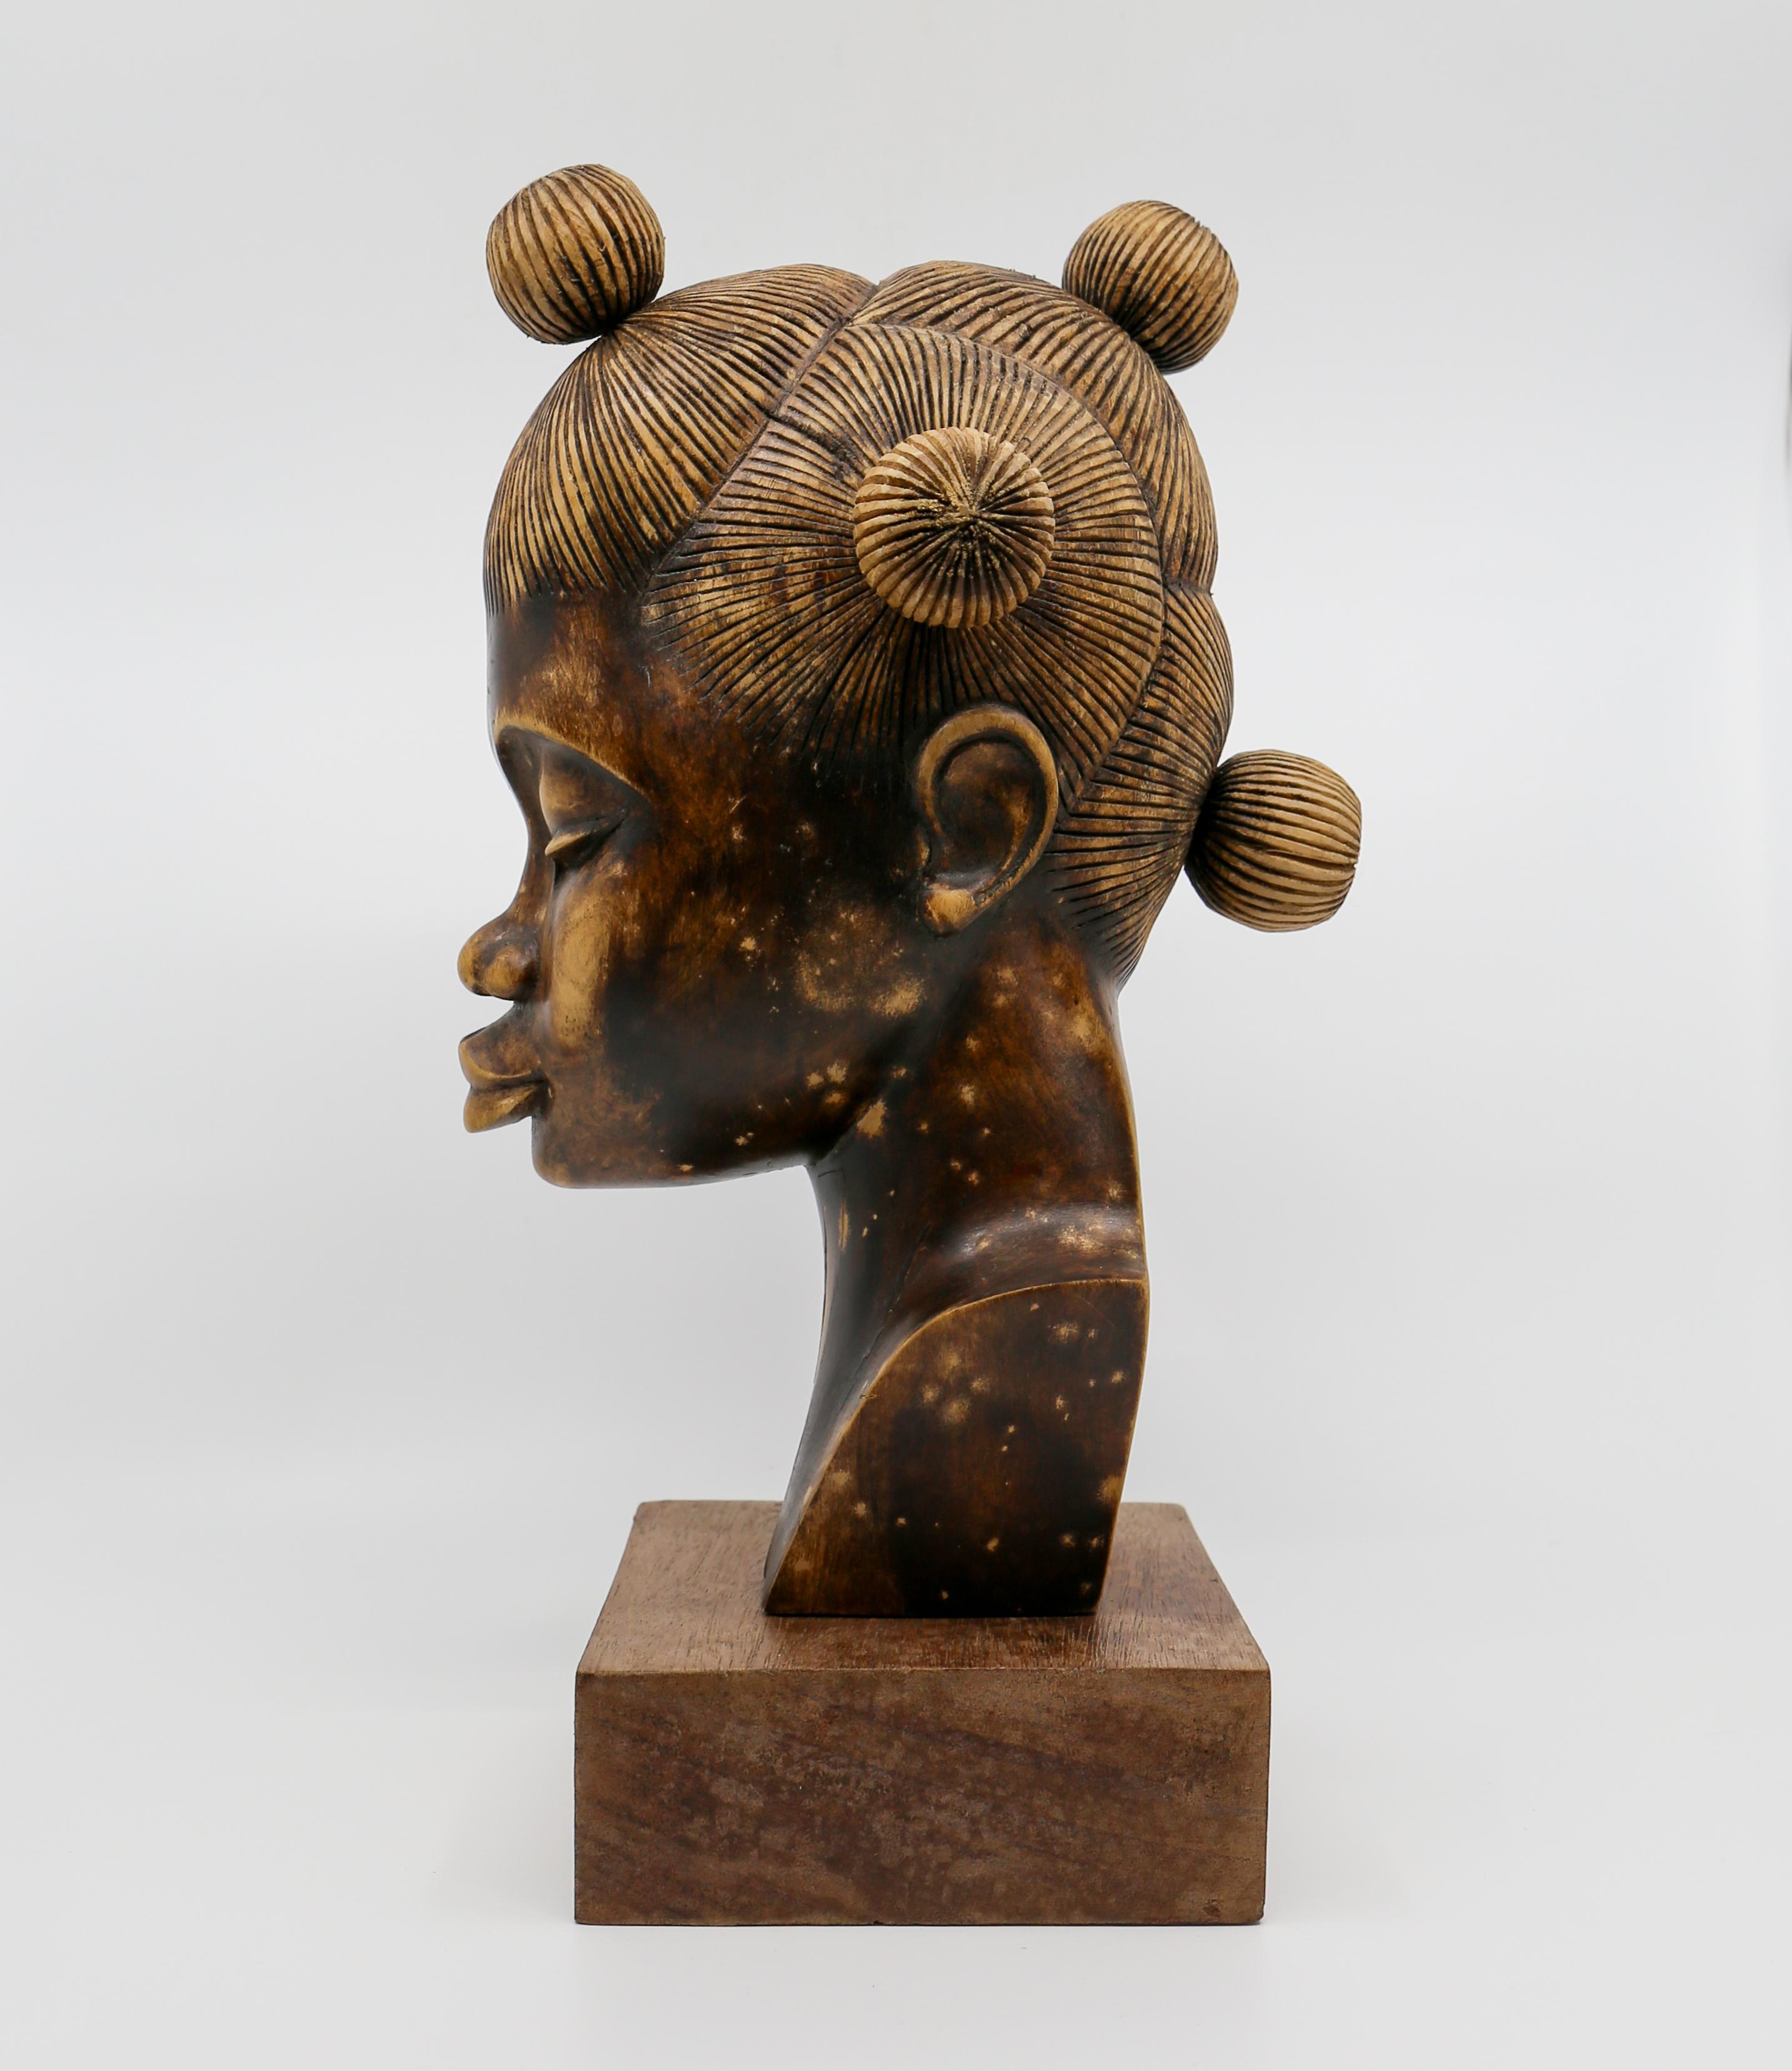 A very beautiful, detailed, African wood female bust figurative sculpture piece made for Western export, early 20th century, Africa. Sculpture is a rich deep brown hue, hand carved and polished from one piece of wood.  